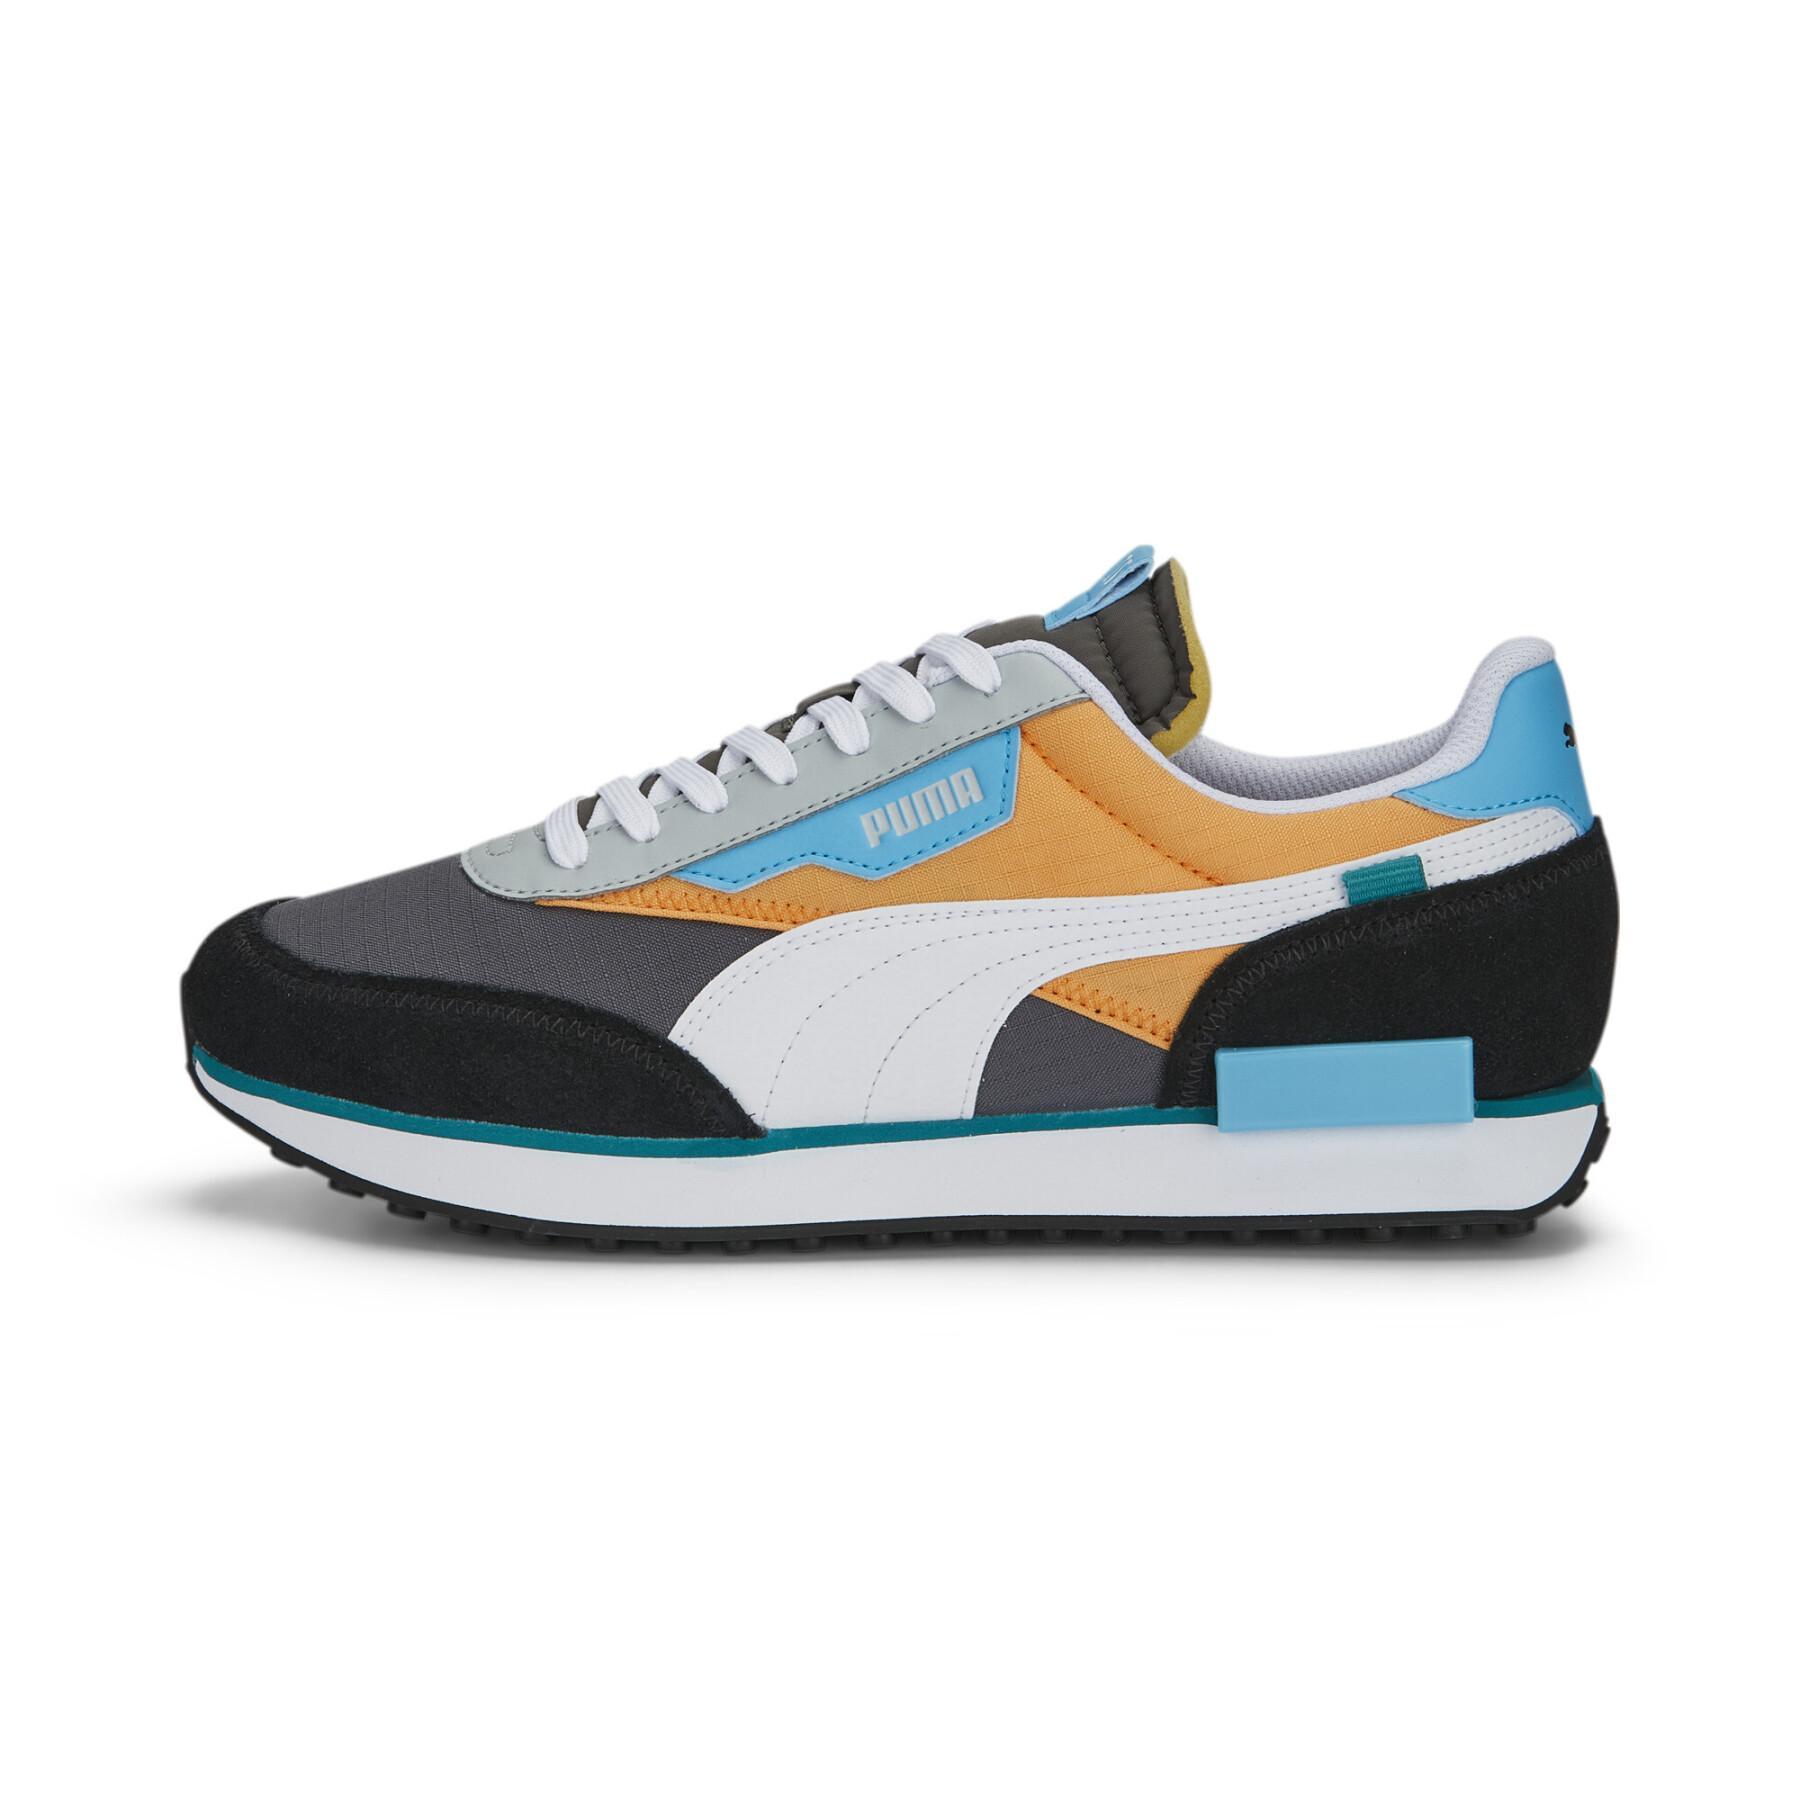 Sneakers Puma Rider Play On - Puma - Men's Sneakers - Lifestyle